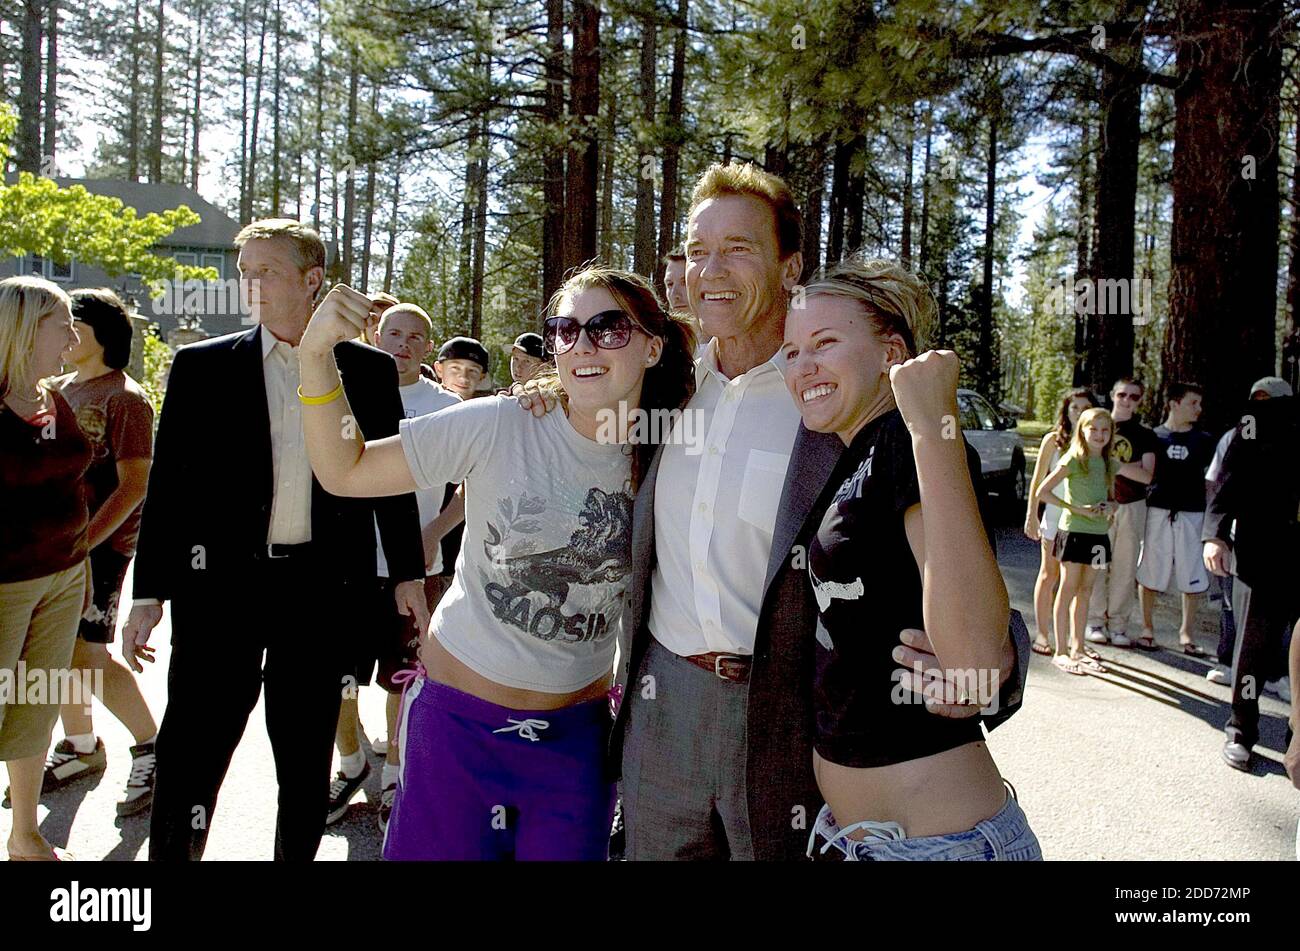 NO FILM, NO VIDEO, NO TV, NO DOCUMENTARY - California Gov. Arnold Schwarzenegger embraces by Morgan Quintana, 16, and Dena Millpointer, 17, (right) of Contra Costa during his visit to Camp Richardson in South Lake Tahoe, CA, USA, on July 2, 2007. The governor asked people not to stay away from vacationing in South Lake Tahoe for the holiday week. Photo by Jose Luis Villegas/Sacramento Bee/MCT/ABACAPRESS.COM Stock Photo